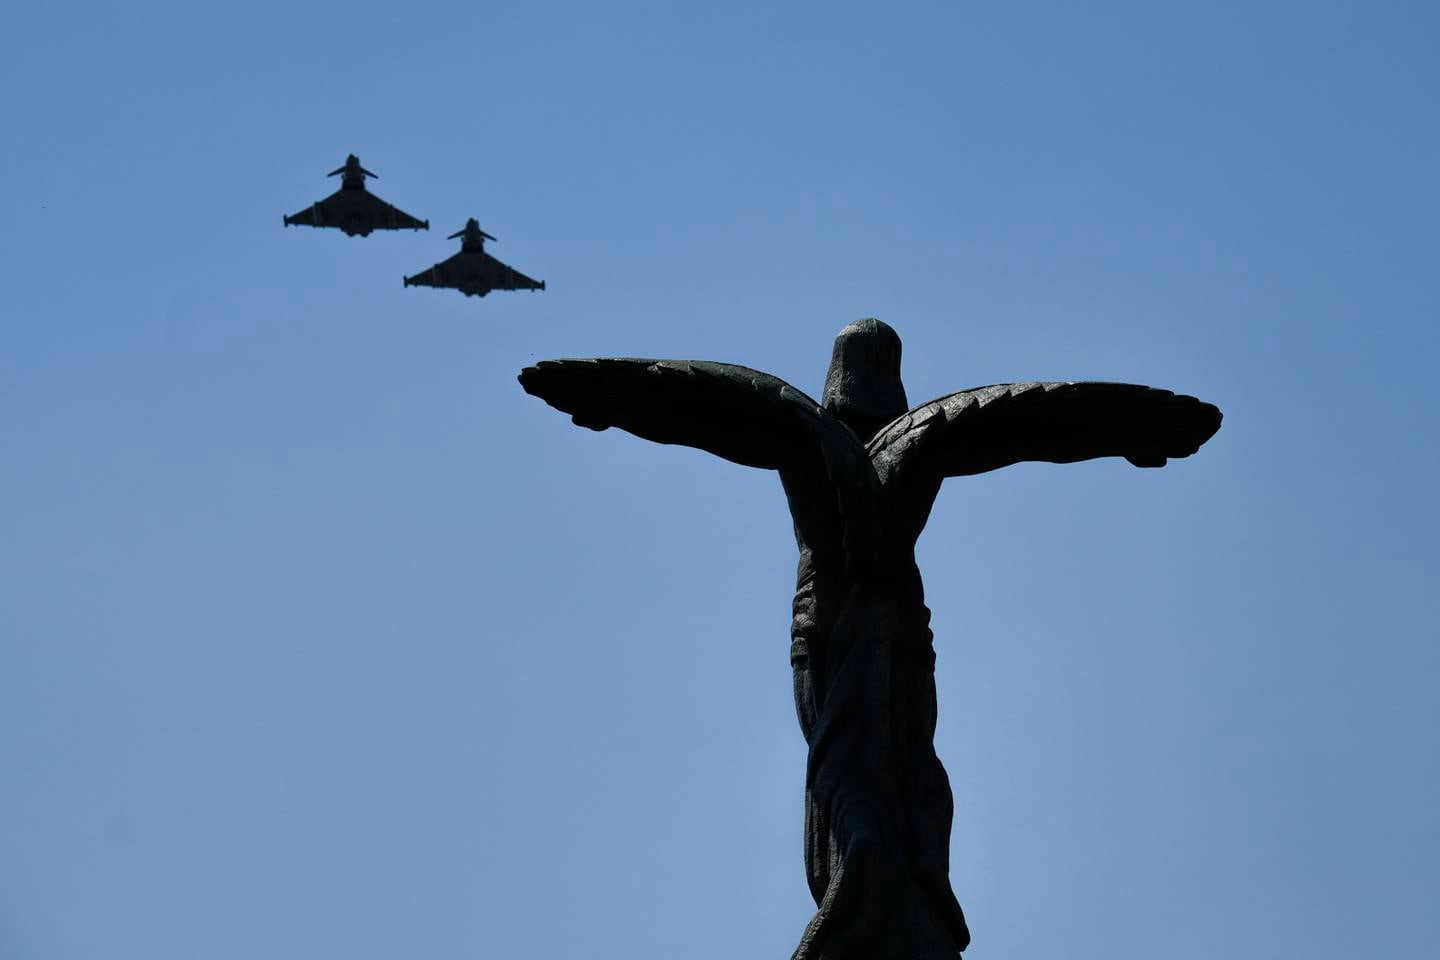 British RAF Typhoon fighter jets fly during a military ceremony at the Aviation Heroes monument in Bucharest, Romania, on Wednesday. AP Photo